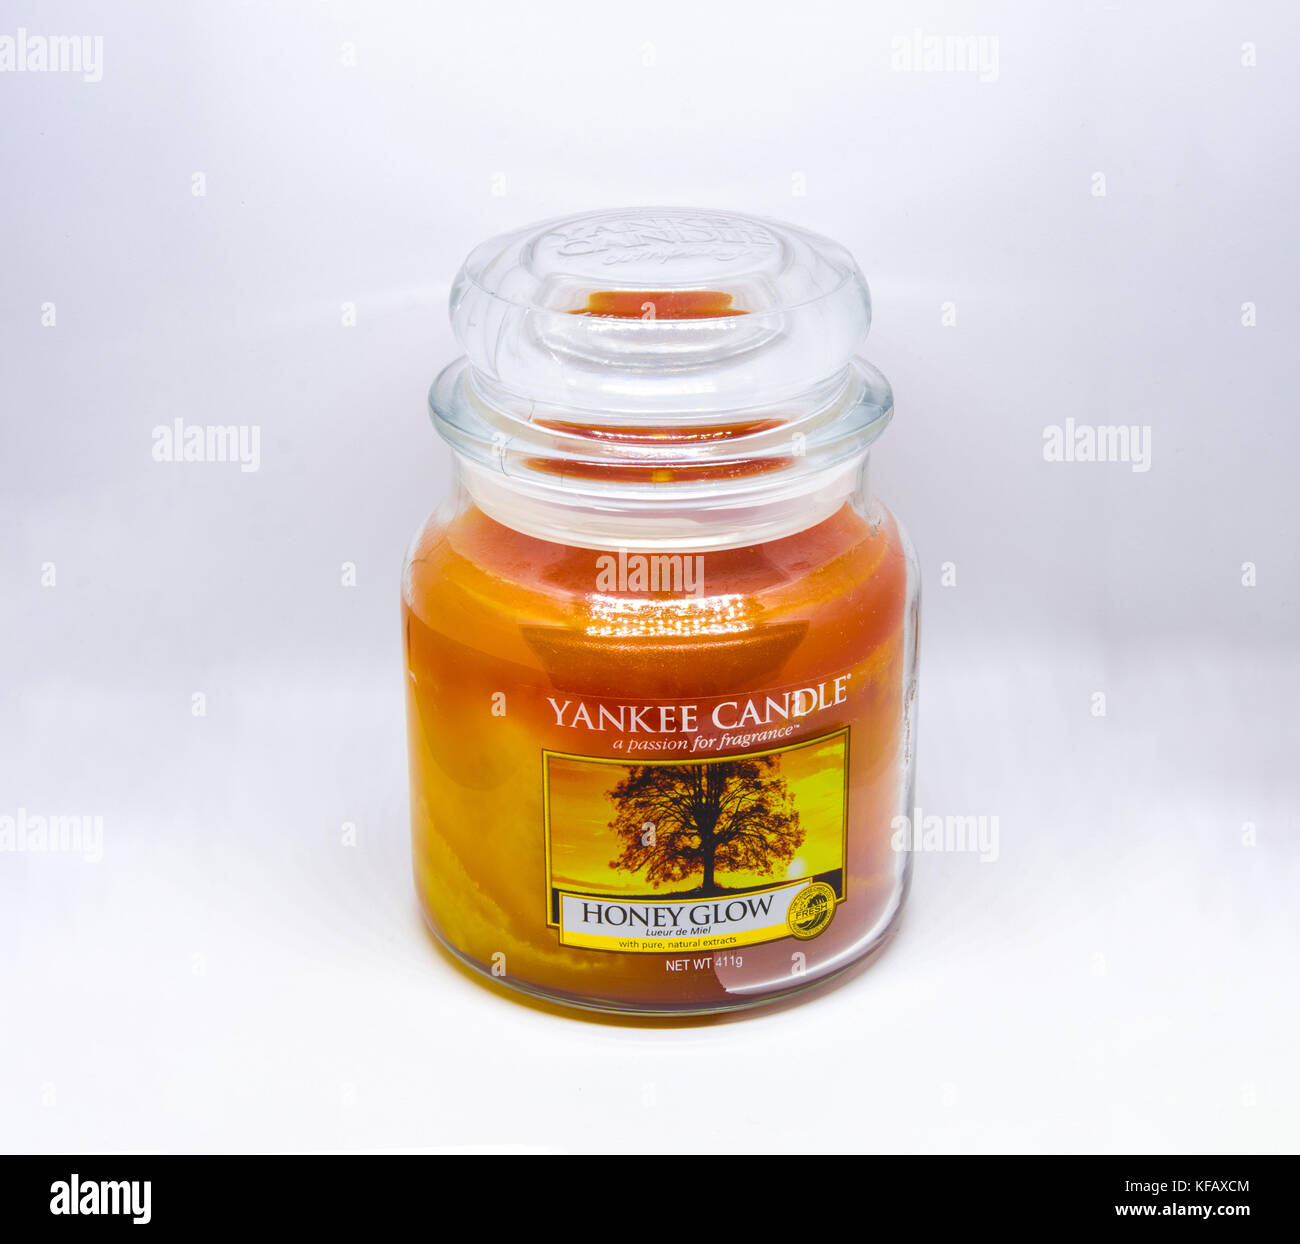 A Yankee Candle in a glass jar. Stock Photo